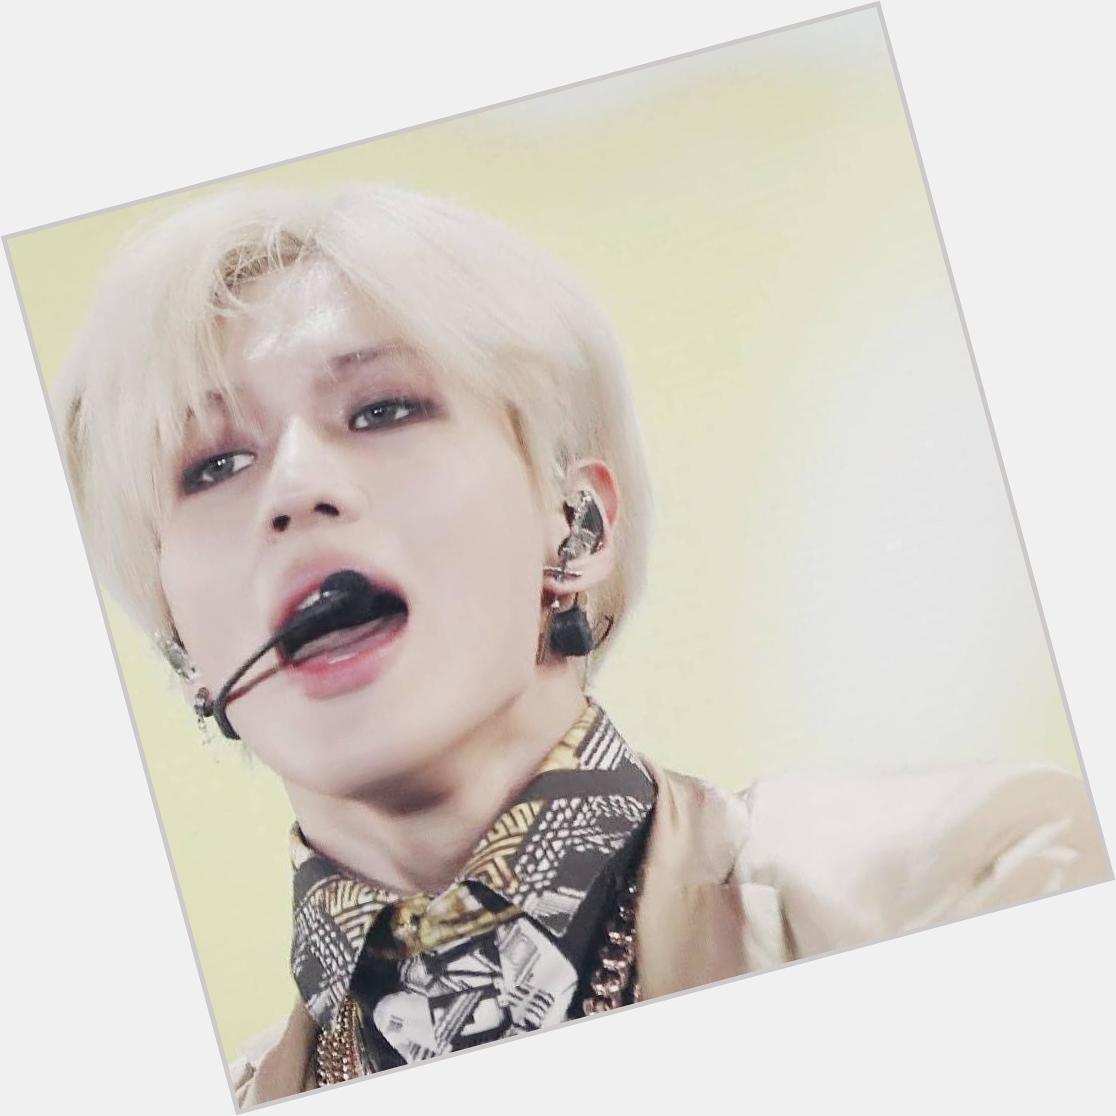 Lee Taemin
You are my first and only idol !!! Congratulations, happy birthday cute !!  